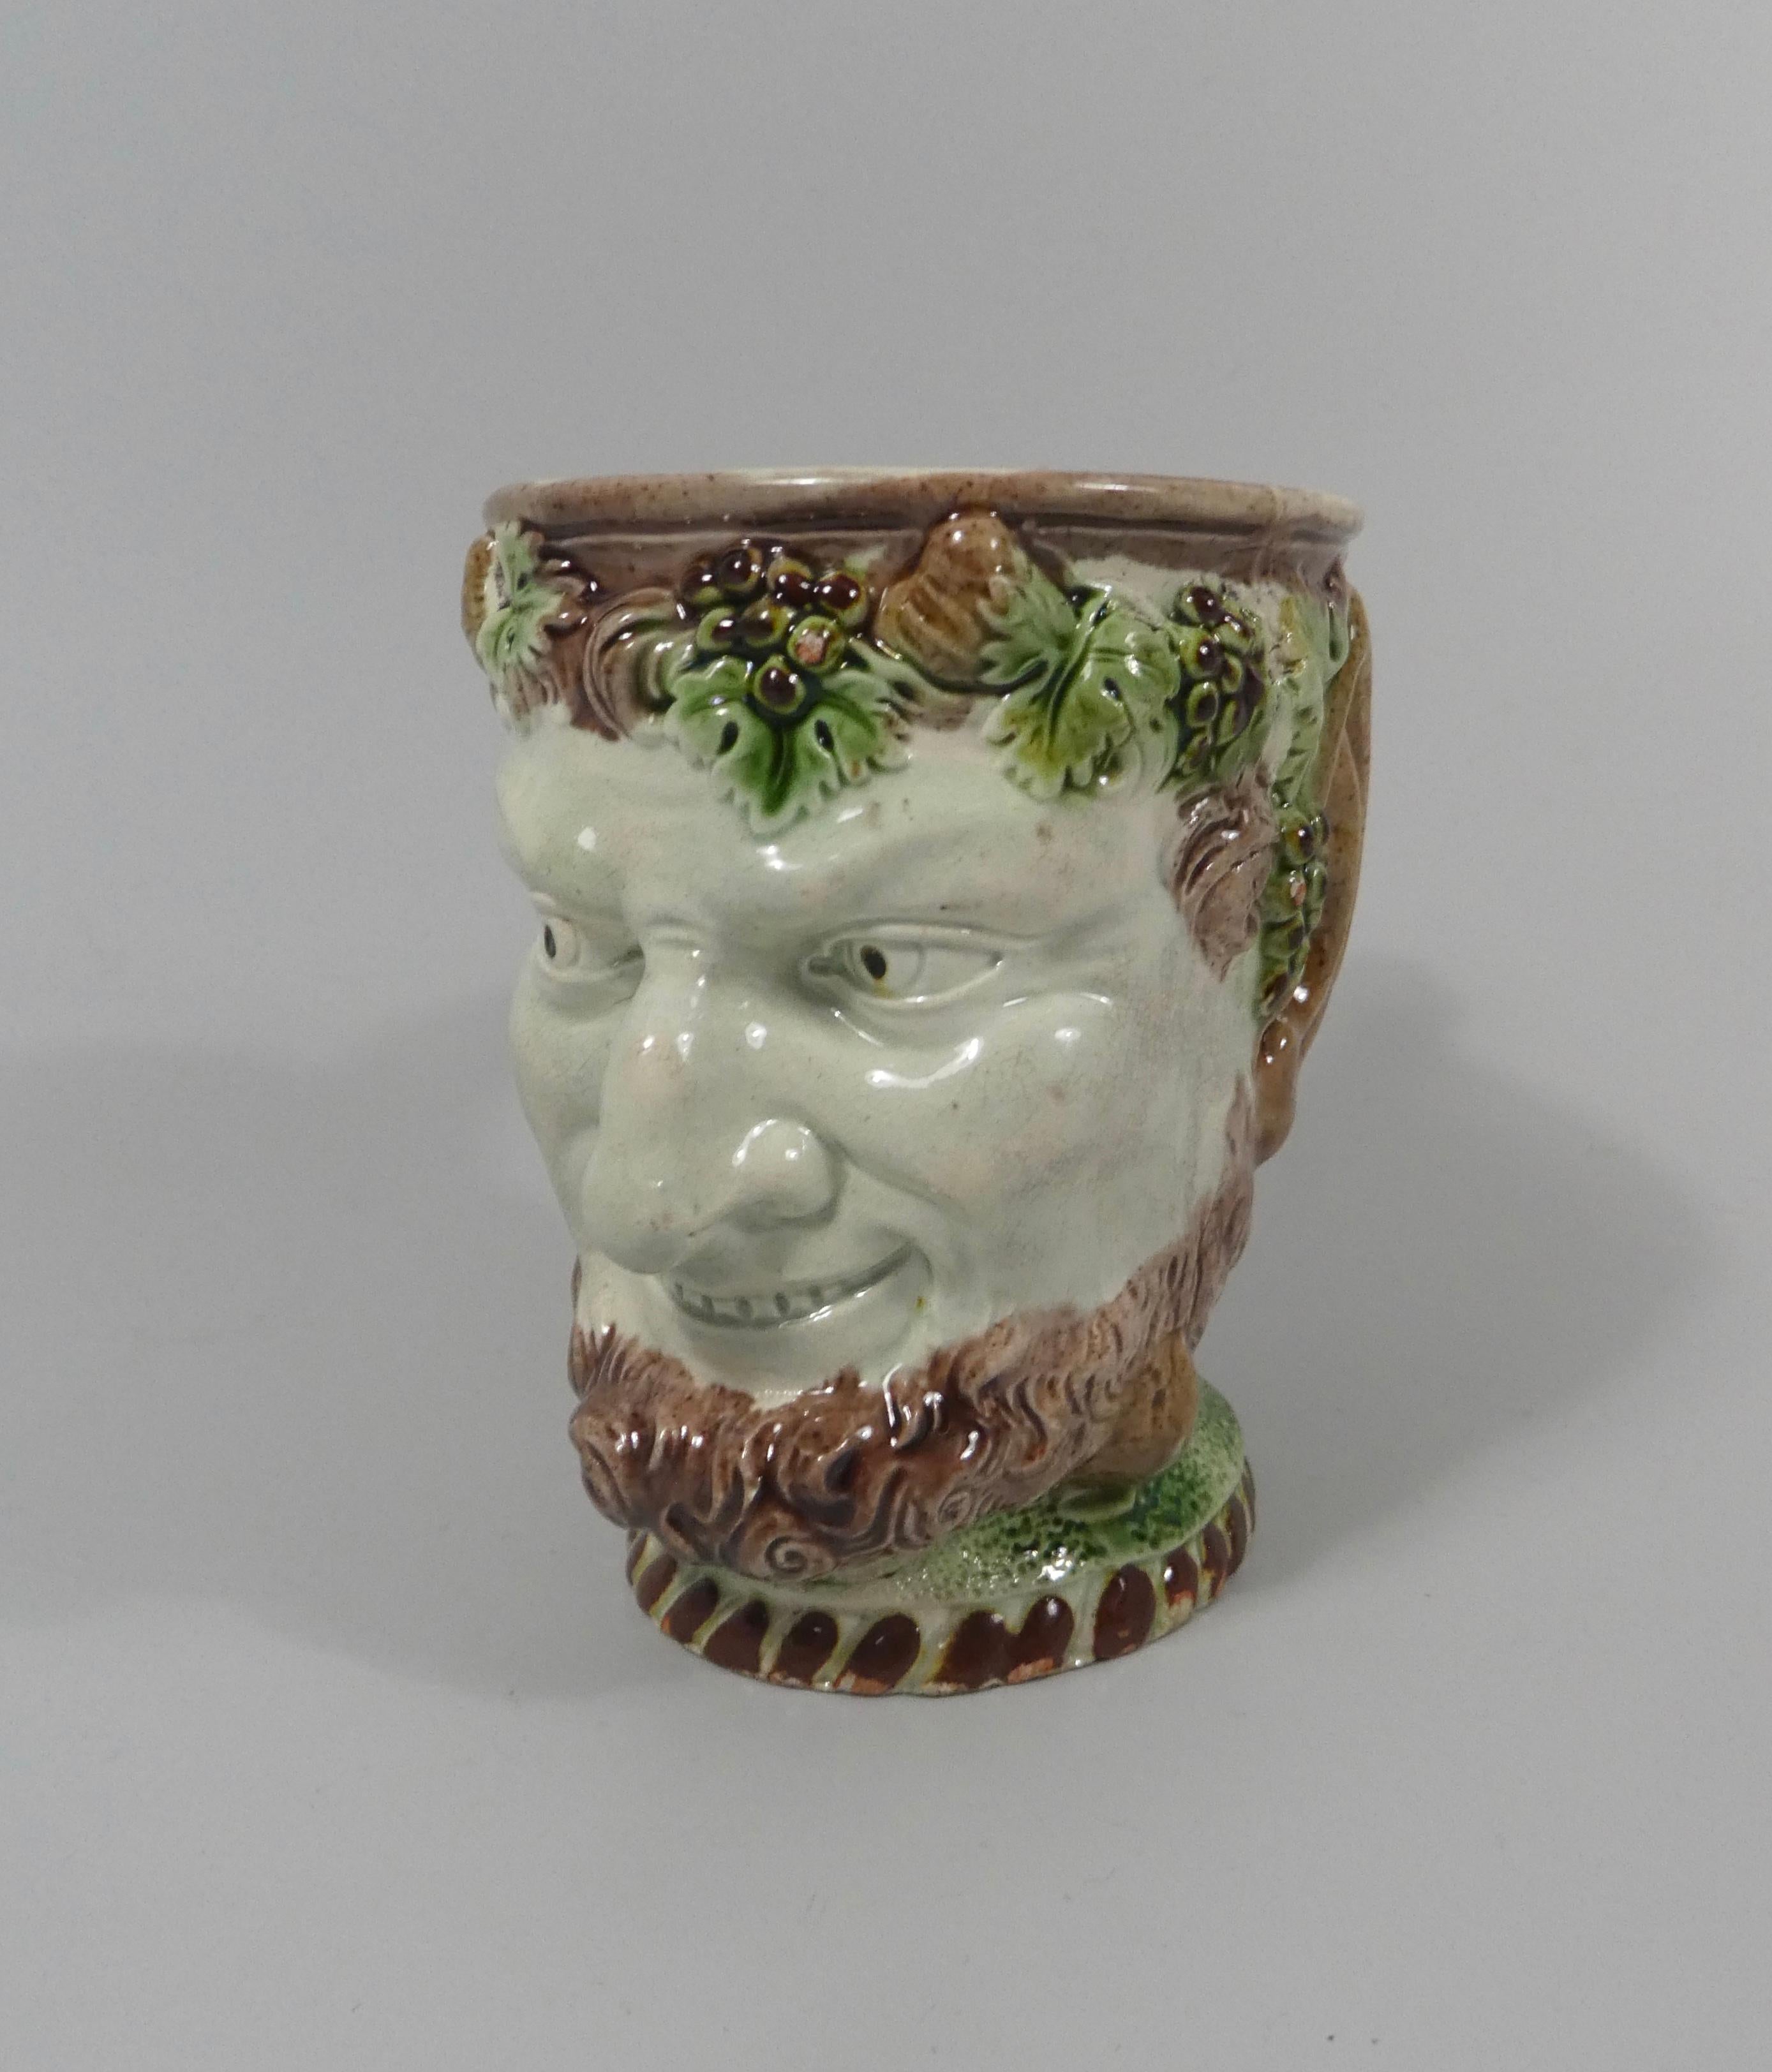 A fine Ralph Wood, Staffordshire creamware mug, circa 1770. The mug taking the form of the head of Bacchus, beneath carefully applied colored glazes. The details are finely defined in this early example, with grapes and vine issuing from the branch